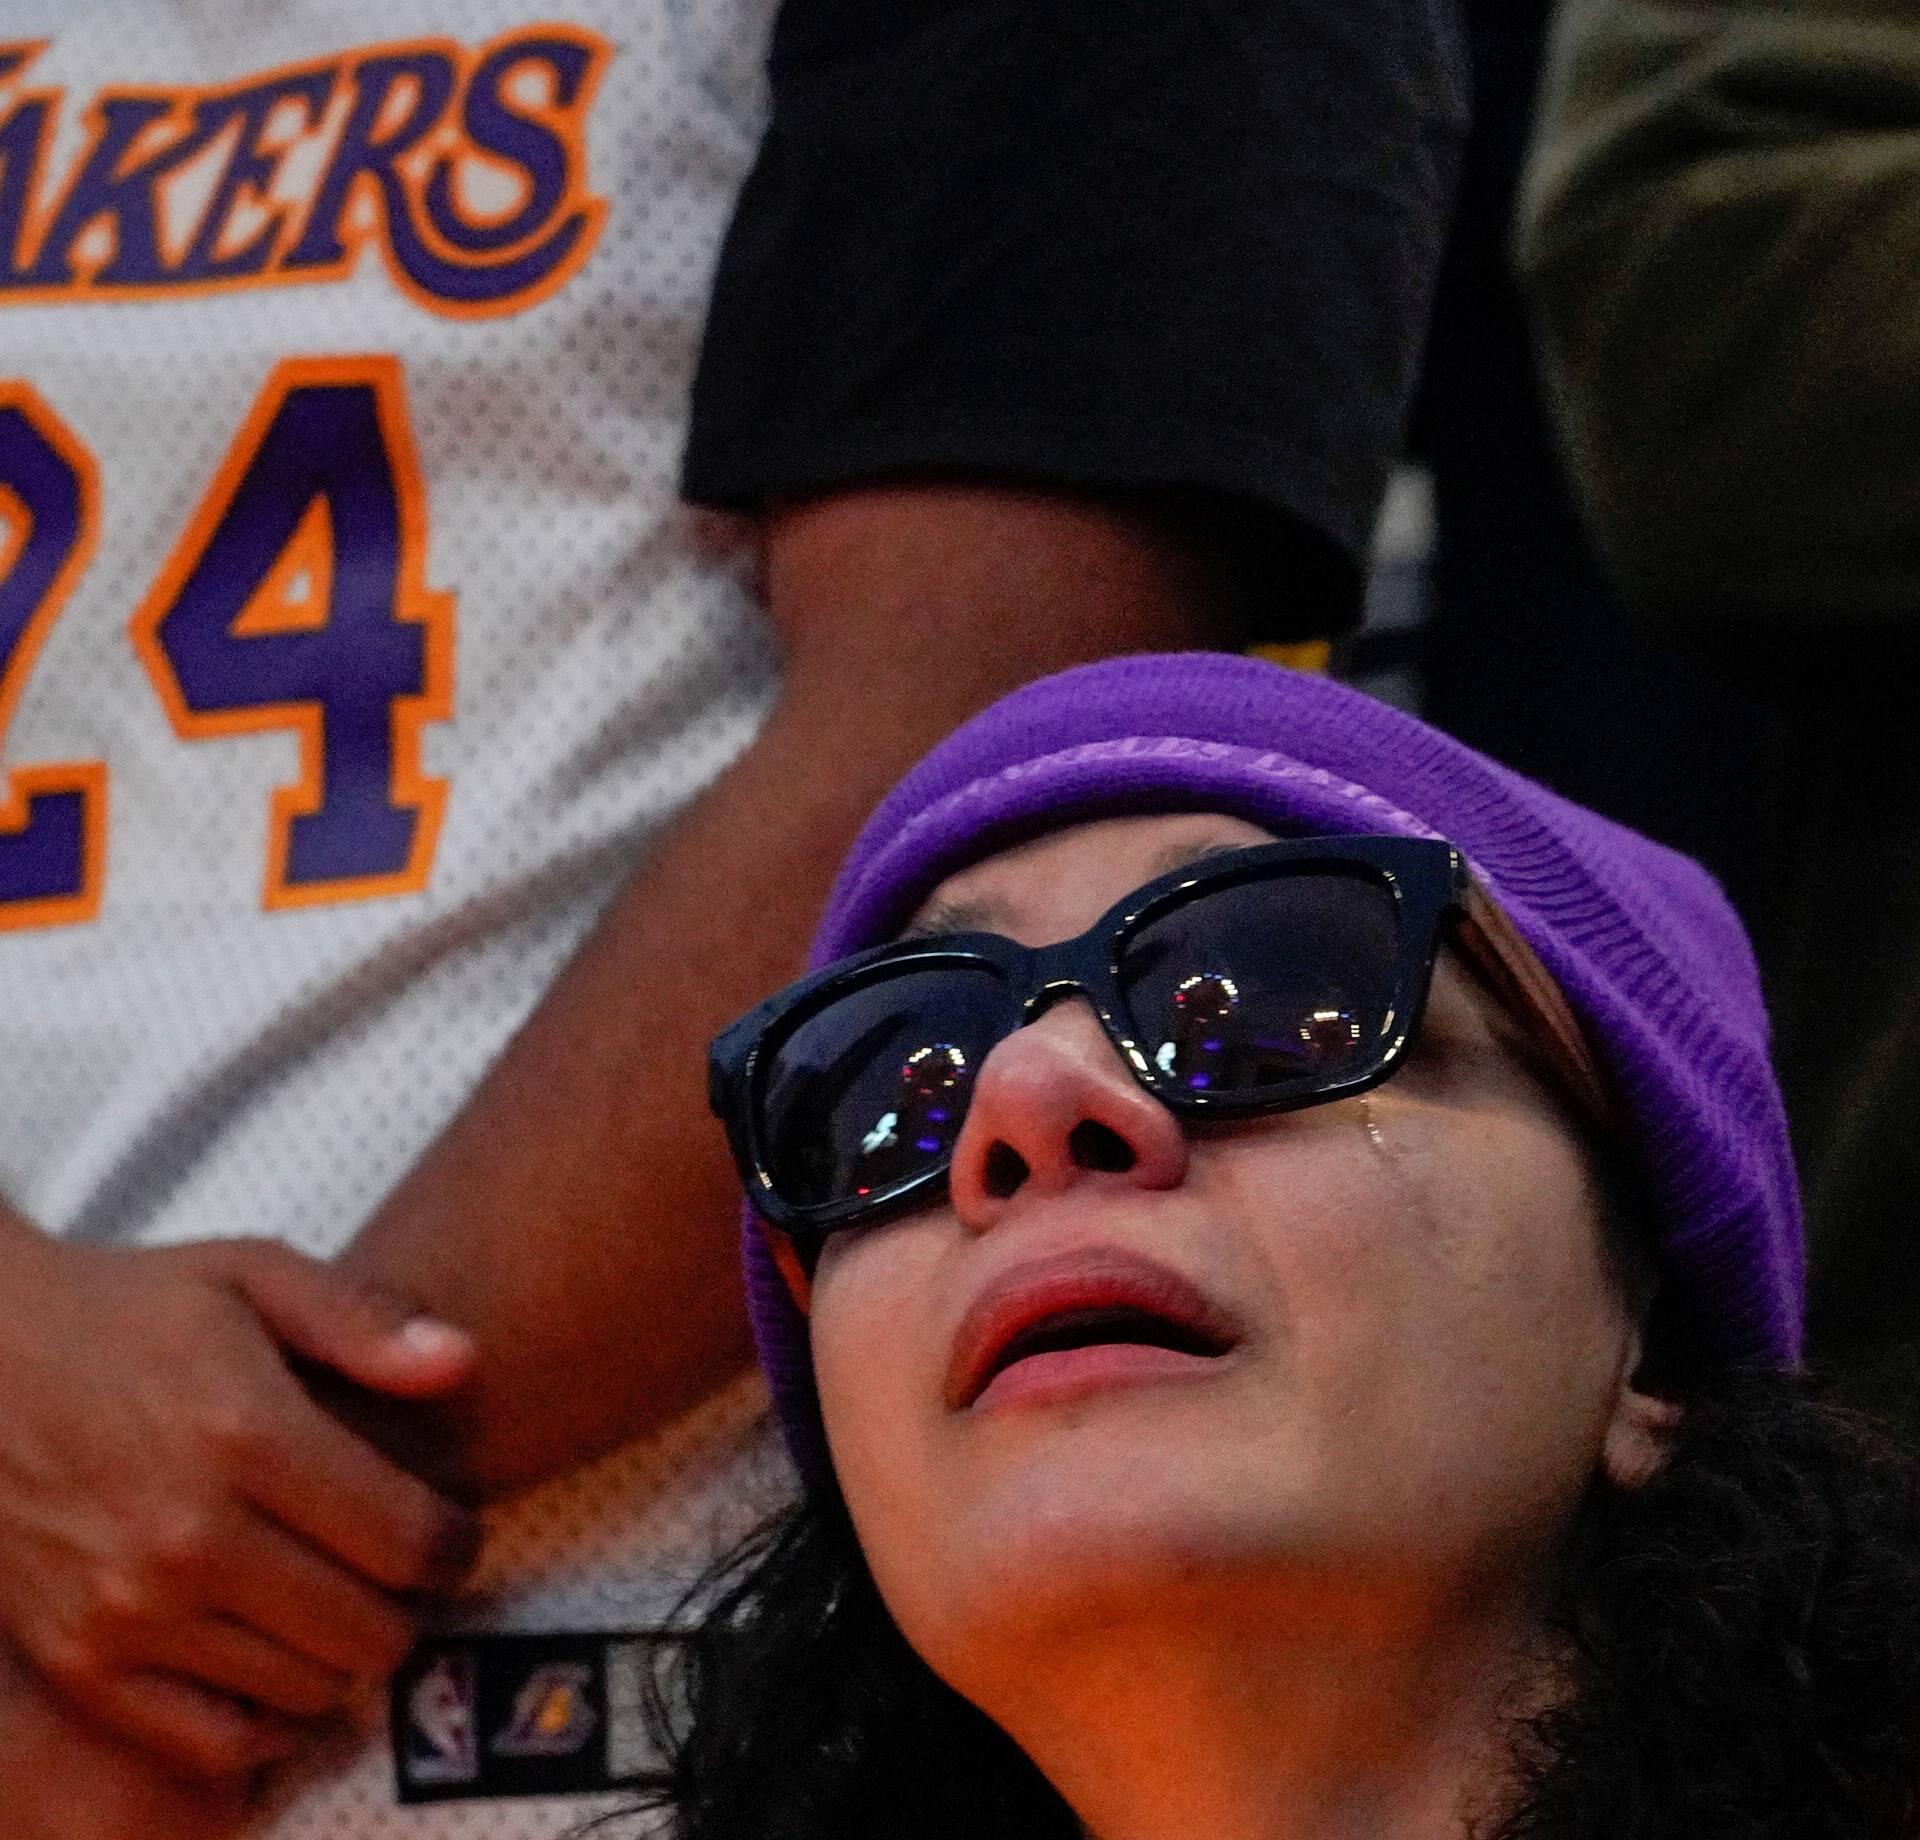 A mourner reacts while gathering with others in Microsoft Square near the Staples Center to pay respects to Kobe Bryant after a helicopter crash killed the retired basketball star, in Los Angeles